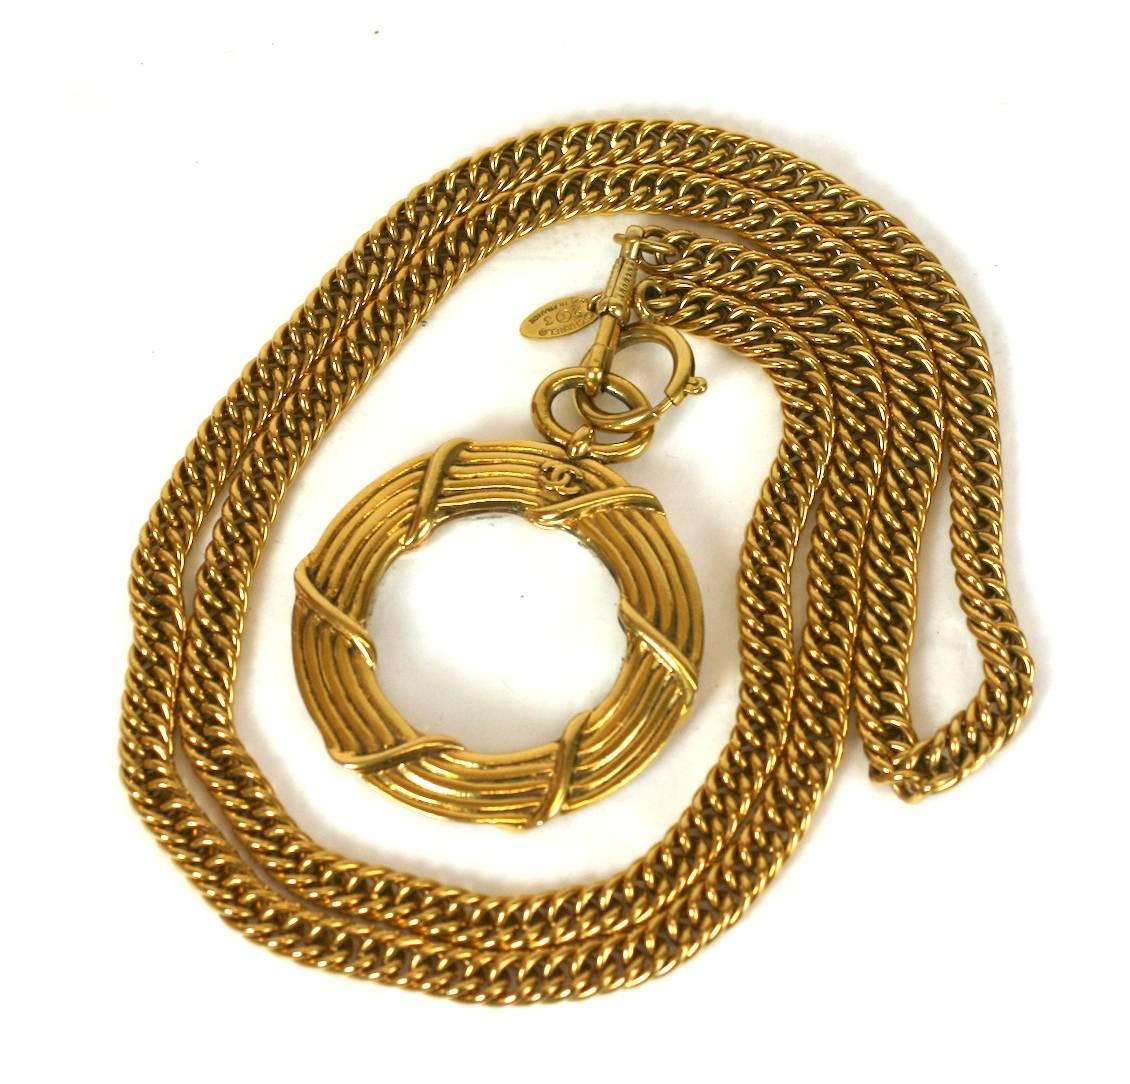 Iconic Chanel Magnifier Pendant Necklace in gilded bronze. Heavy chain with logo emblazoned on bezel of magnifier. Double clasps allow another pendant to be used with the same Chanel chain. 1980's France. Excellent condition.
